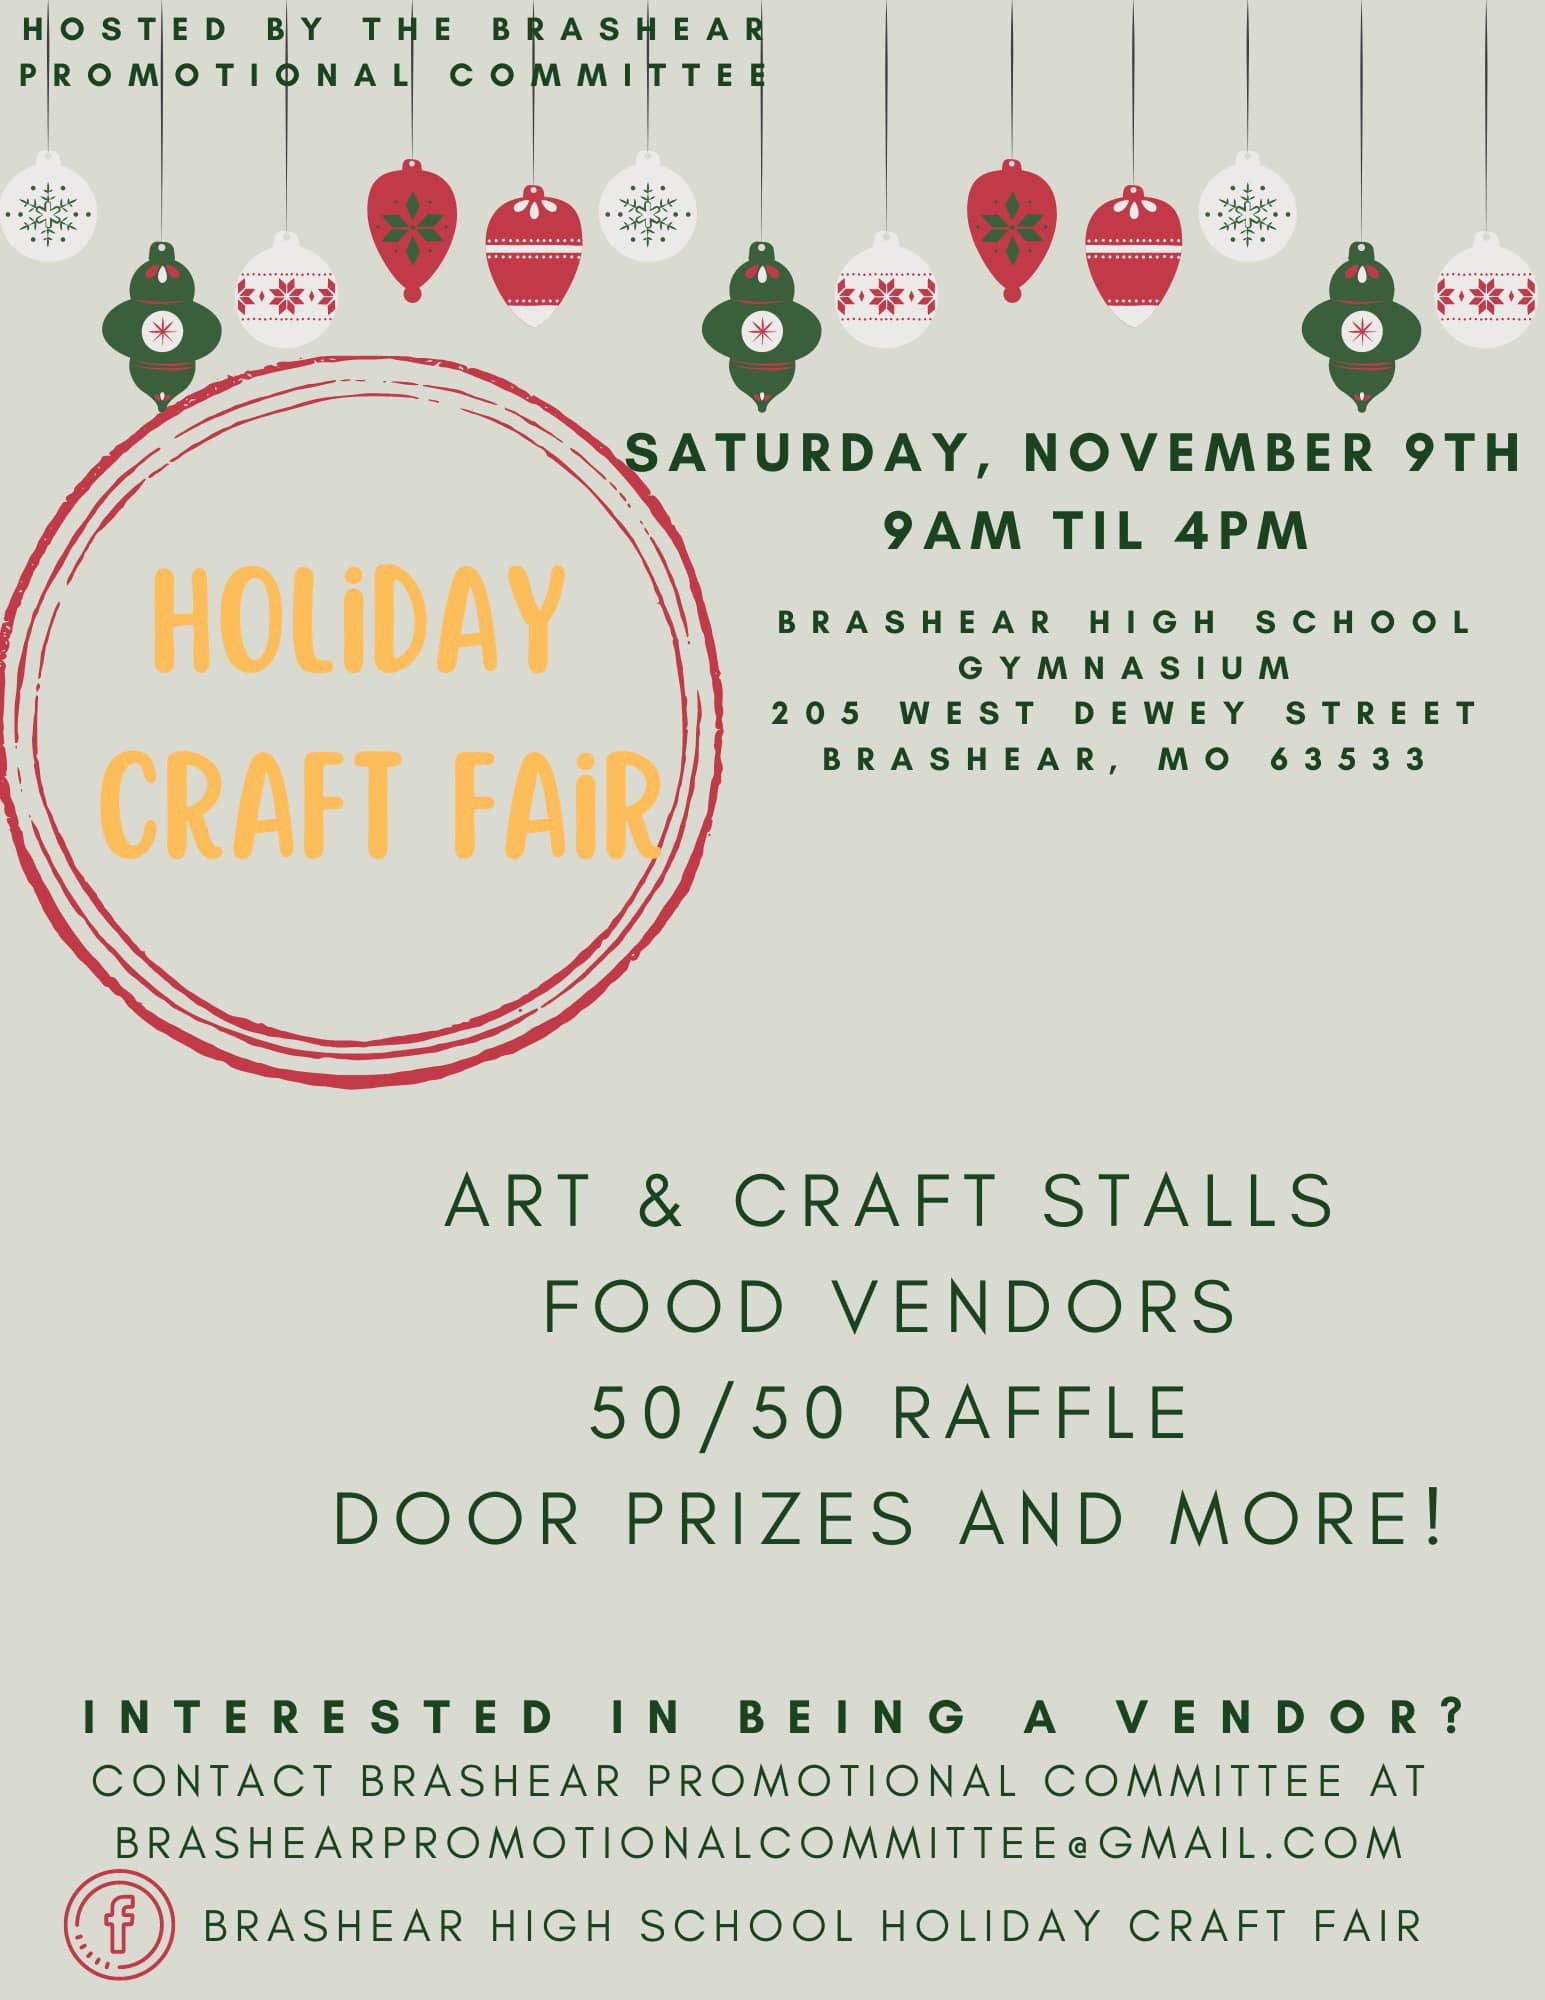 Check more about Holiday Craft Fair